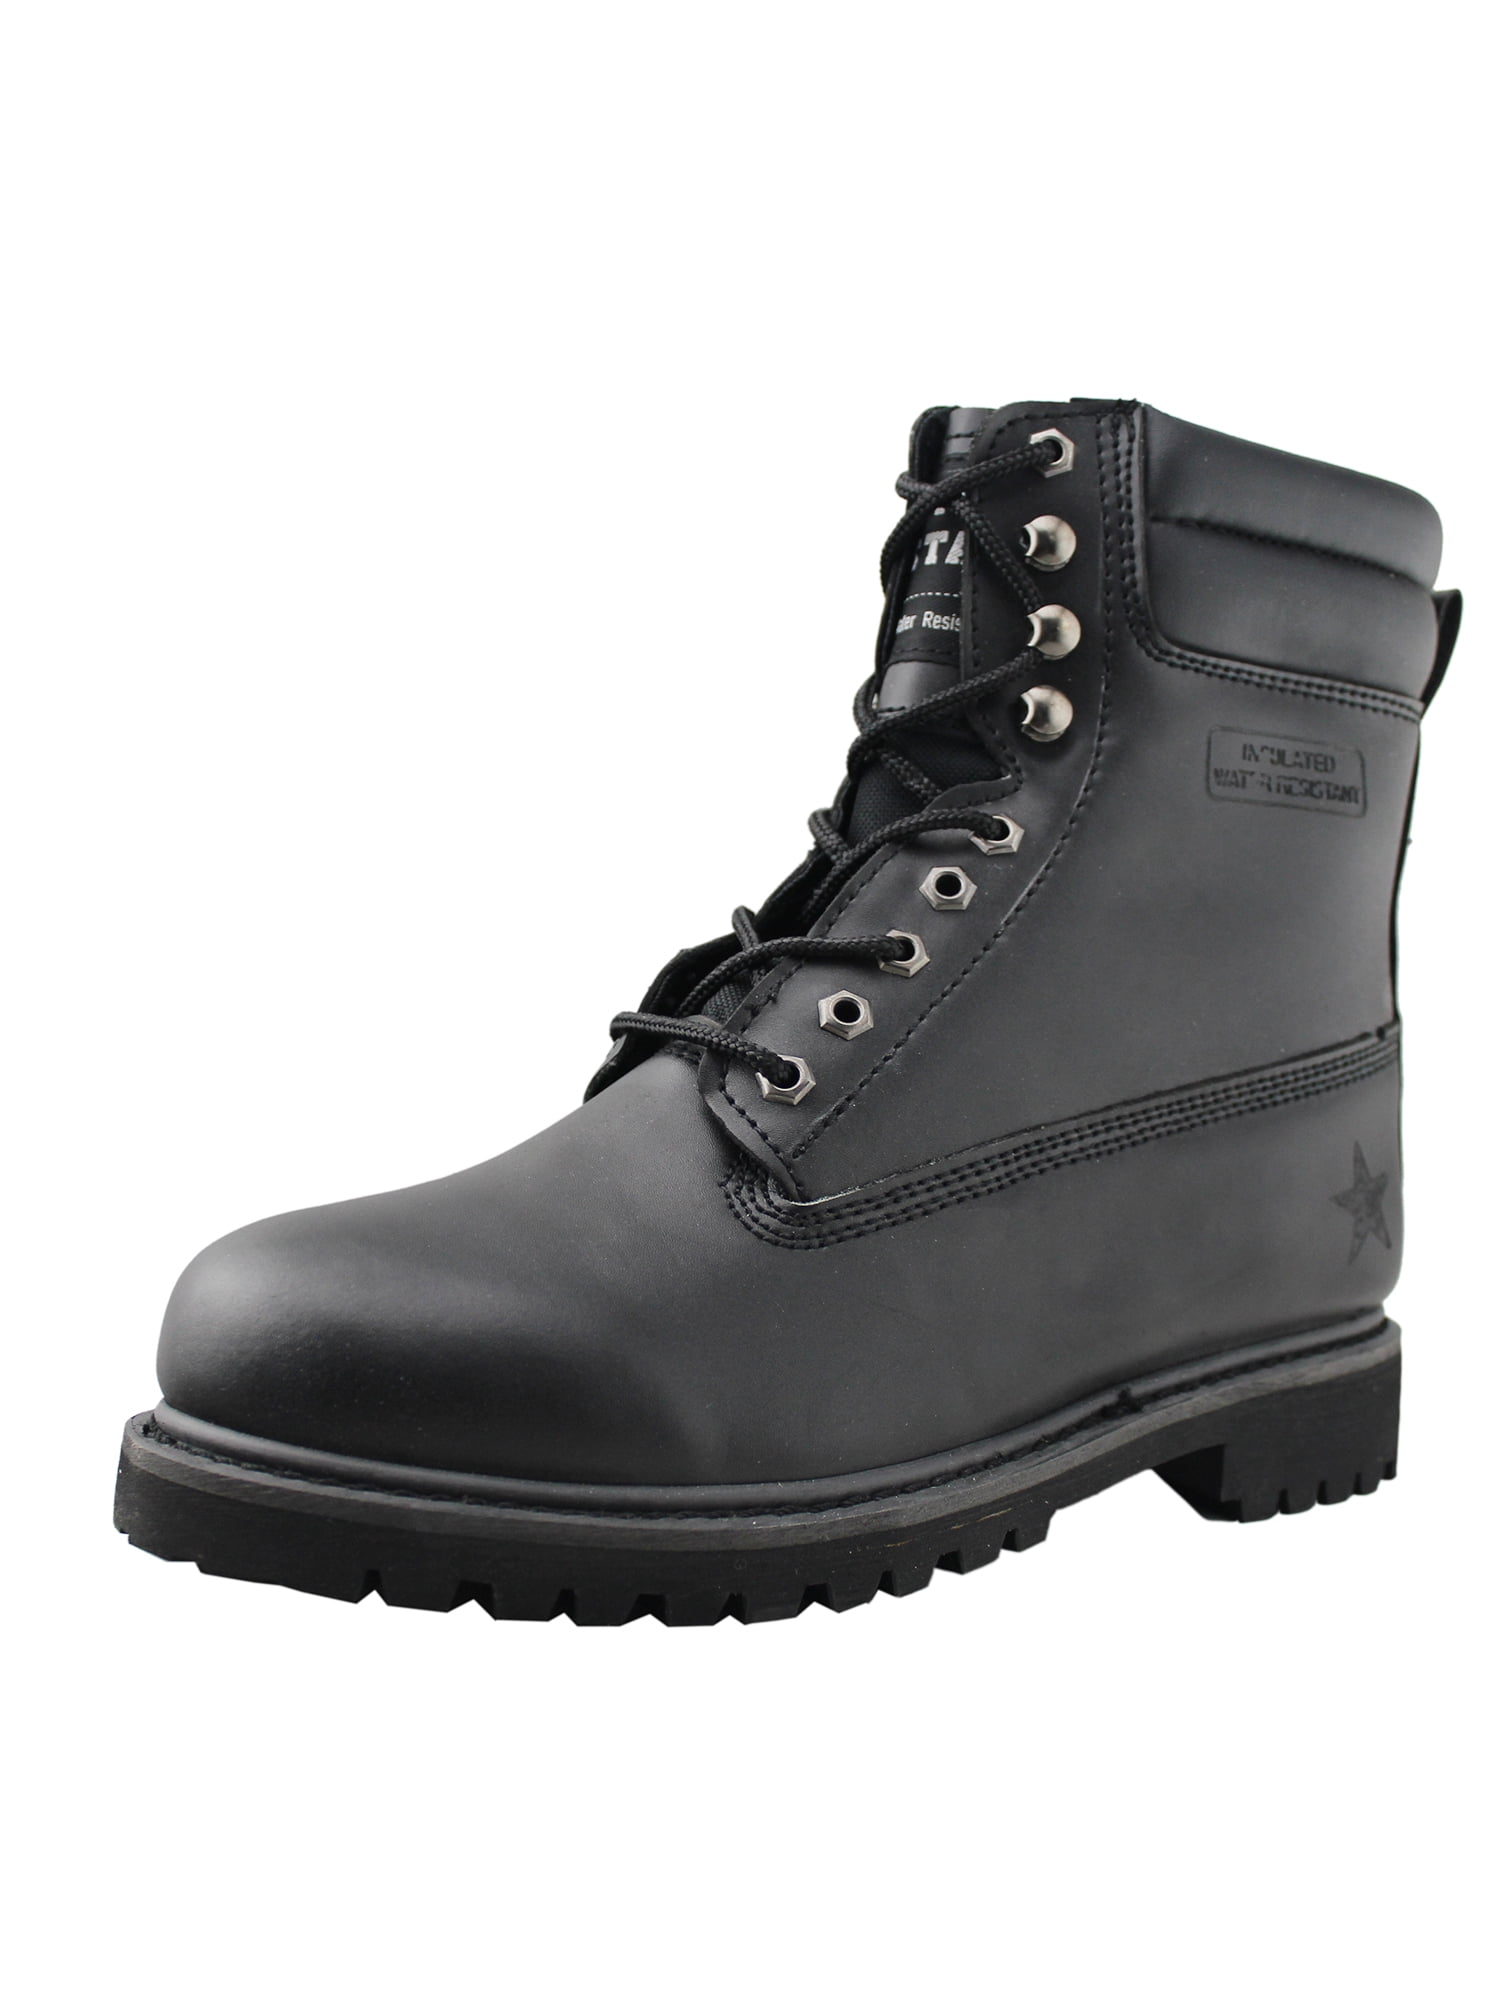 Mens Leather Work Shoes Waterproof Casual Ankle Boots - Walmart.com